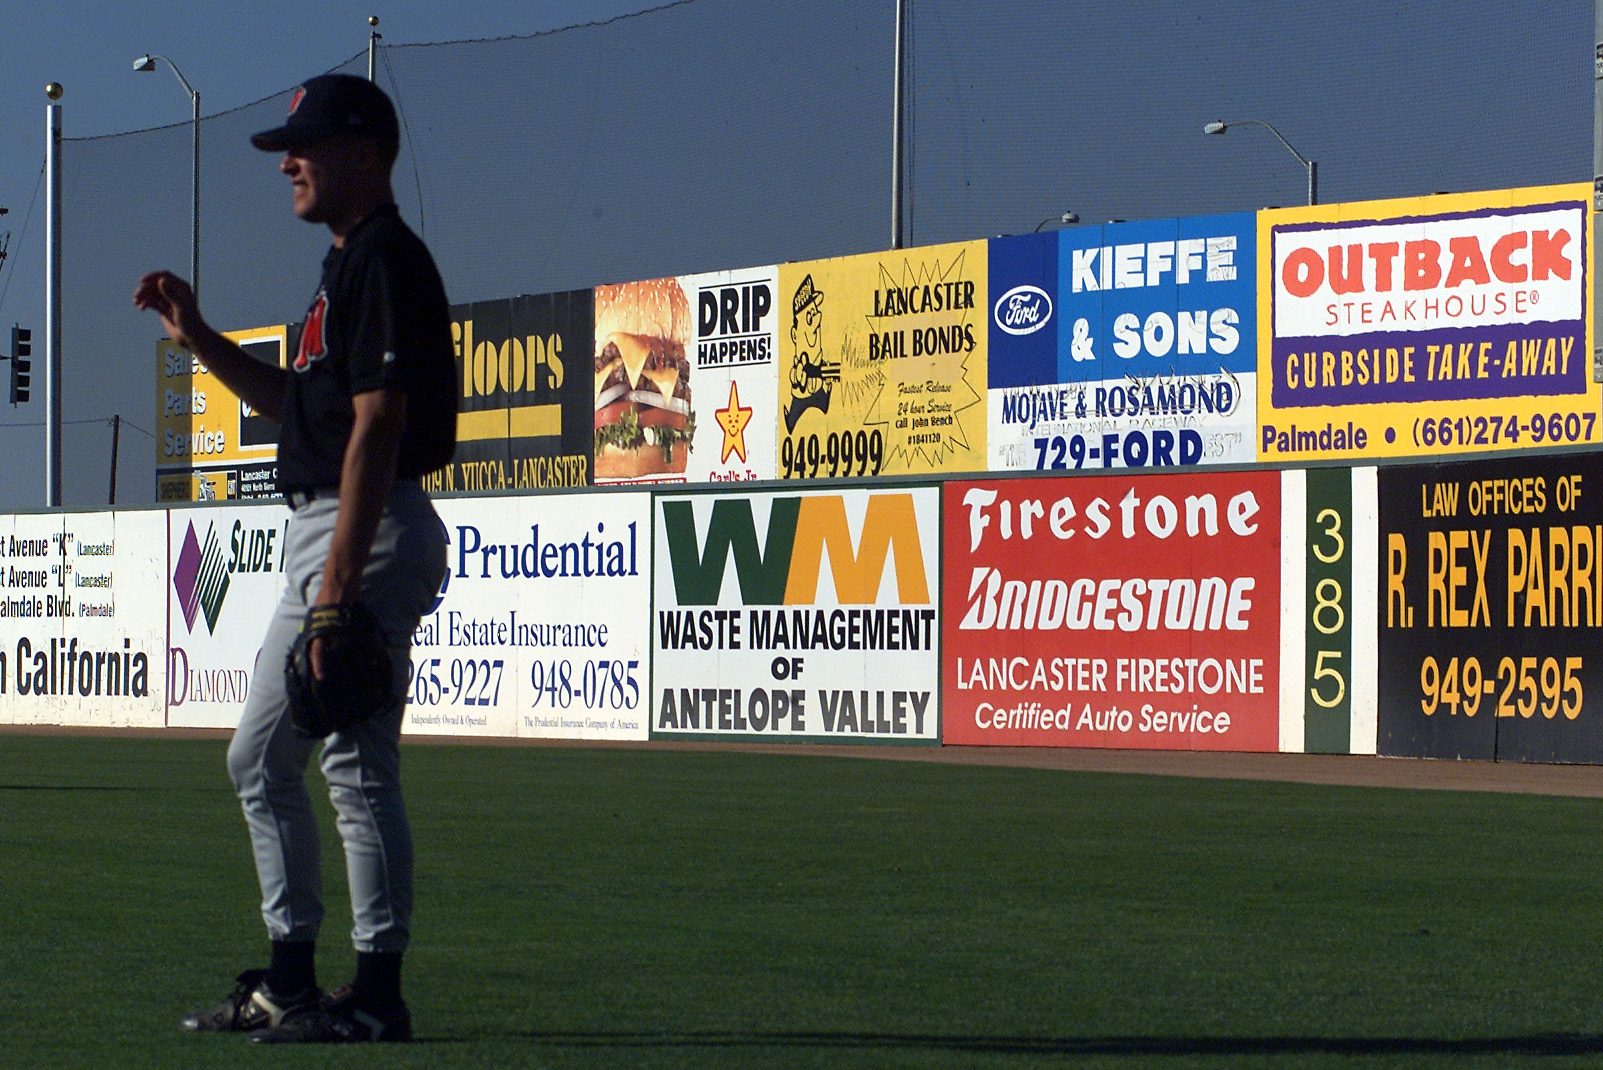 Advertisements cover the outfield walls of The Hangar, the Lancaster Jethawks baseball stadium.